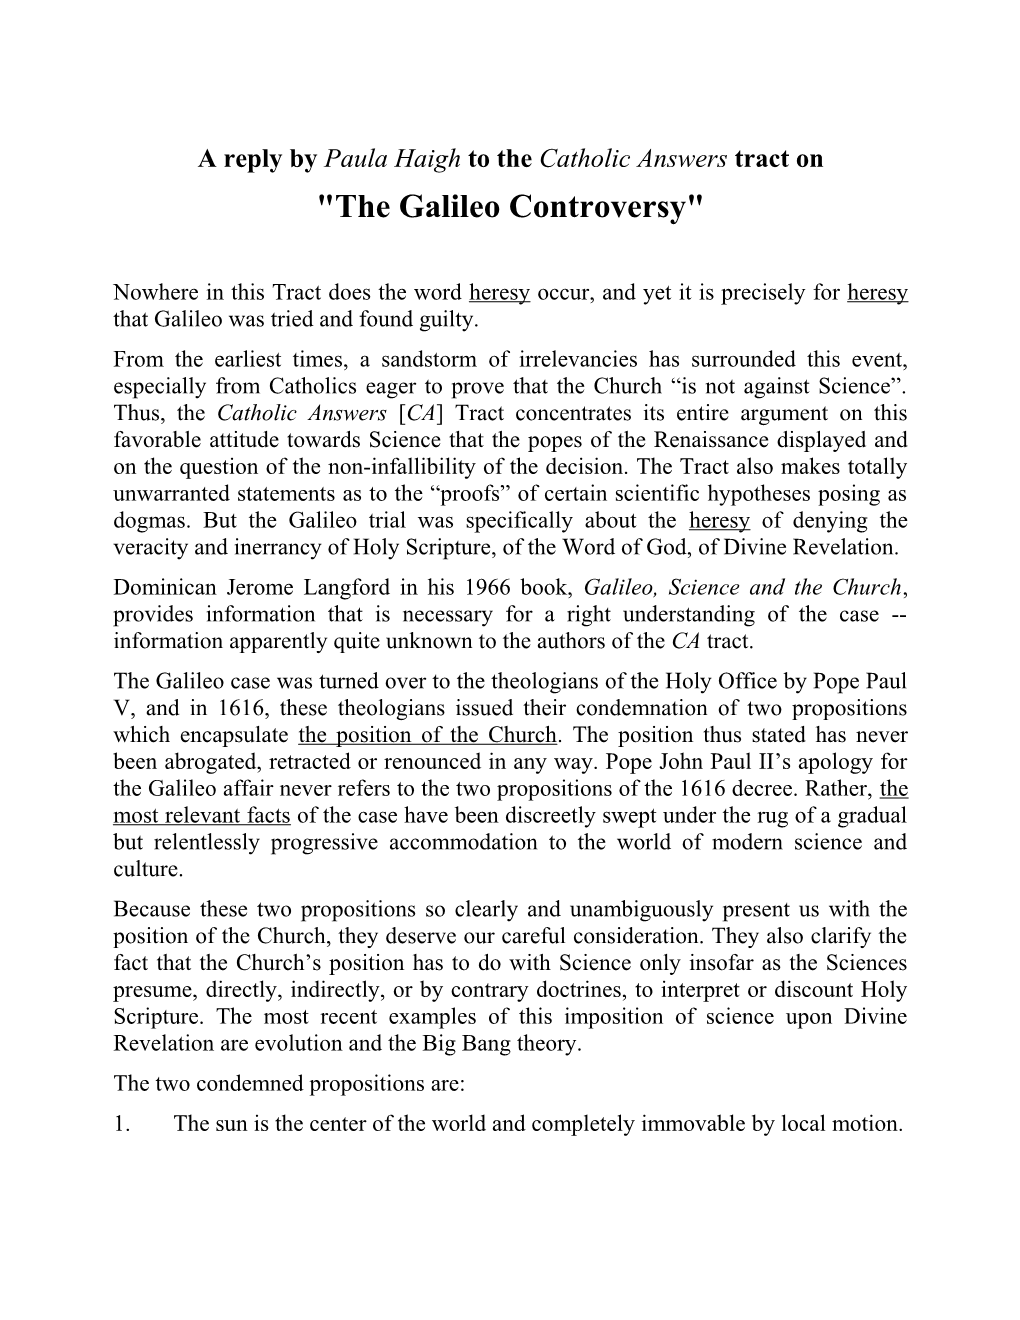 A REPLY to the CATHOLIC ANSWERS TRACT ON